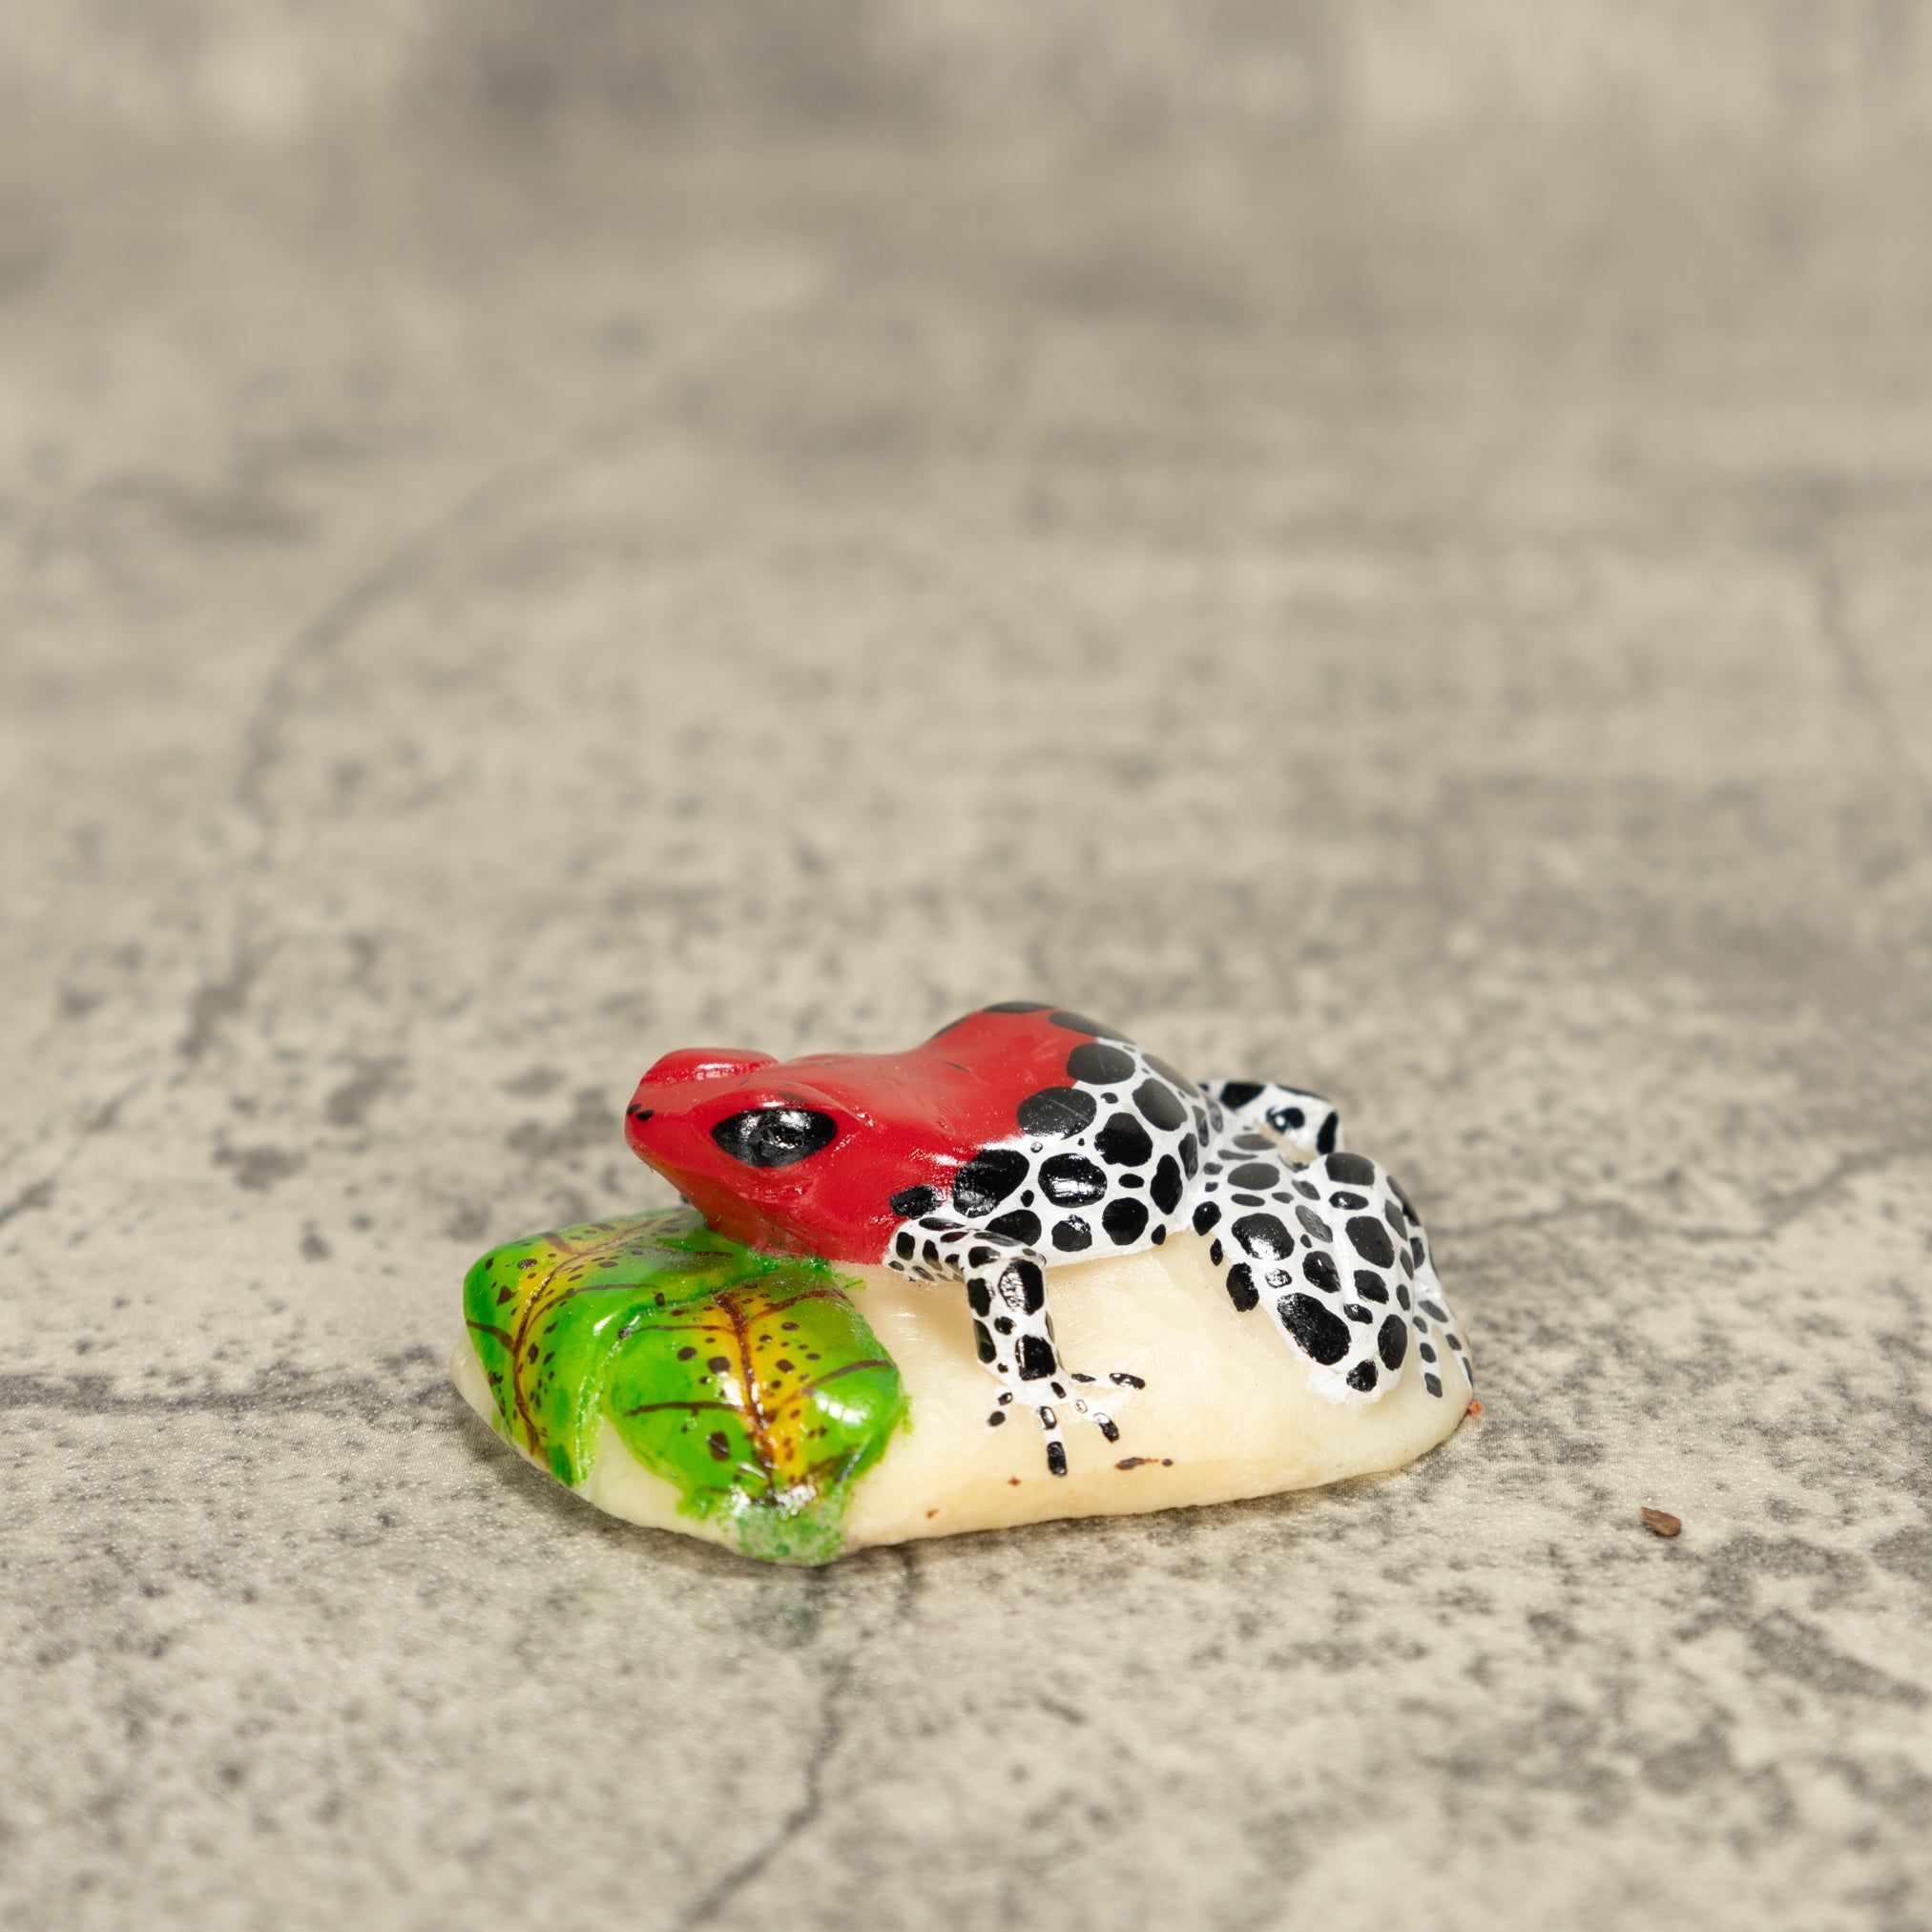 Red Black And White Poison Dart Frog Tagua Nut Carving